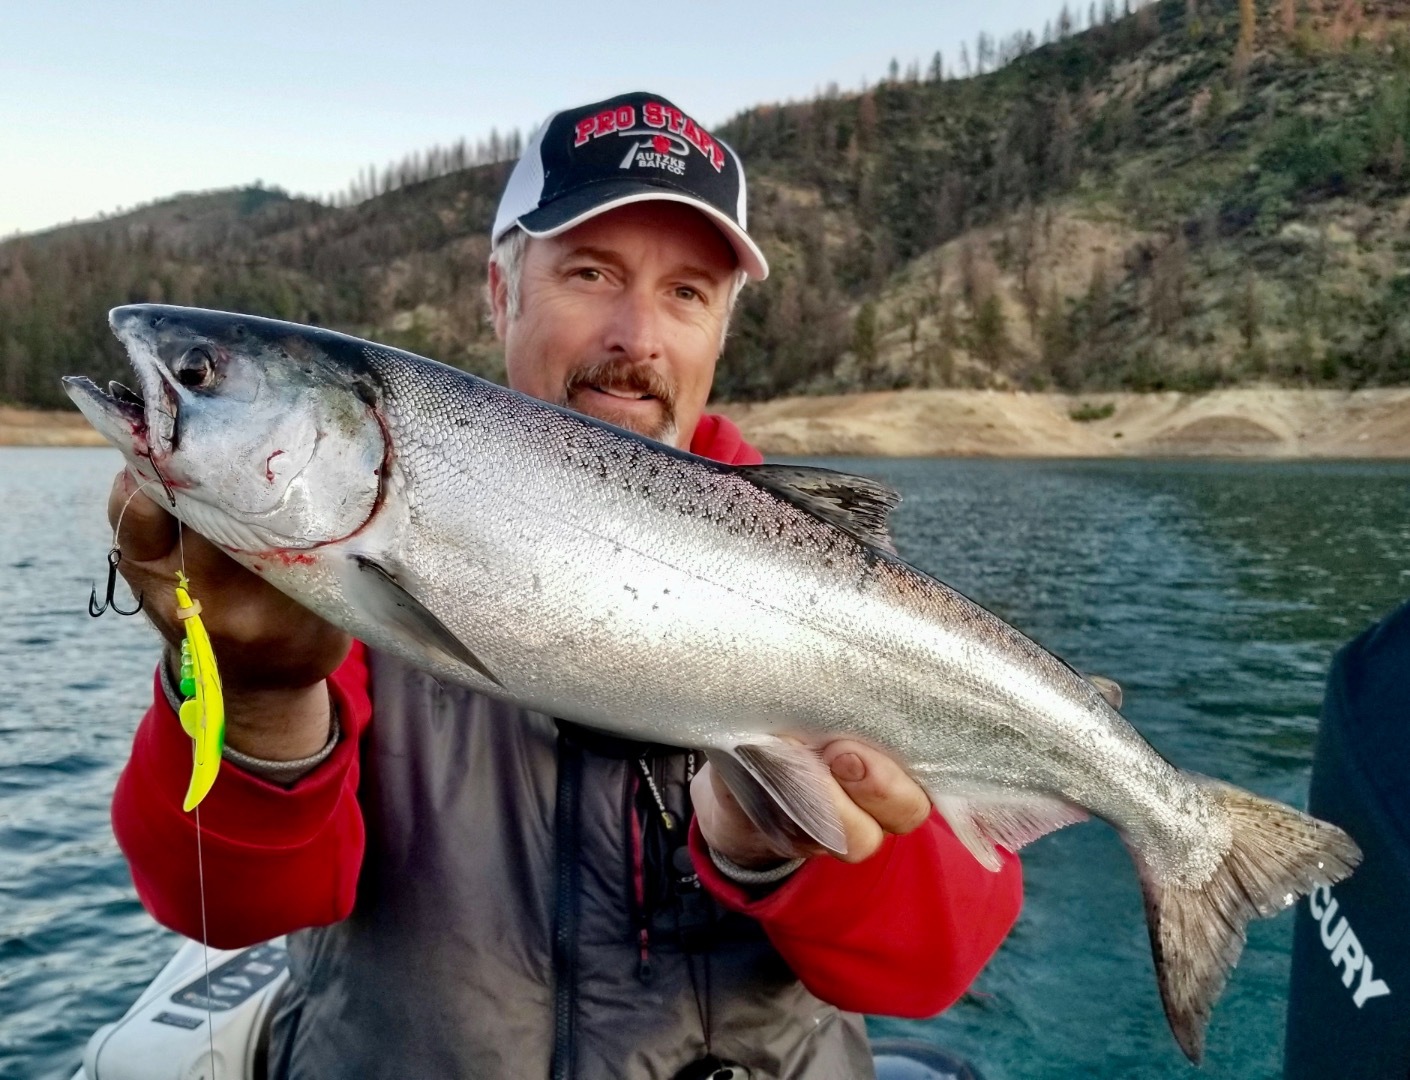 Kings for a day on Shasta Lake